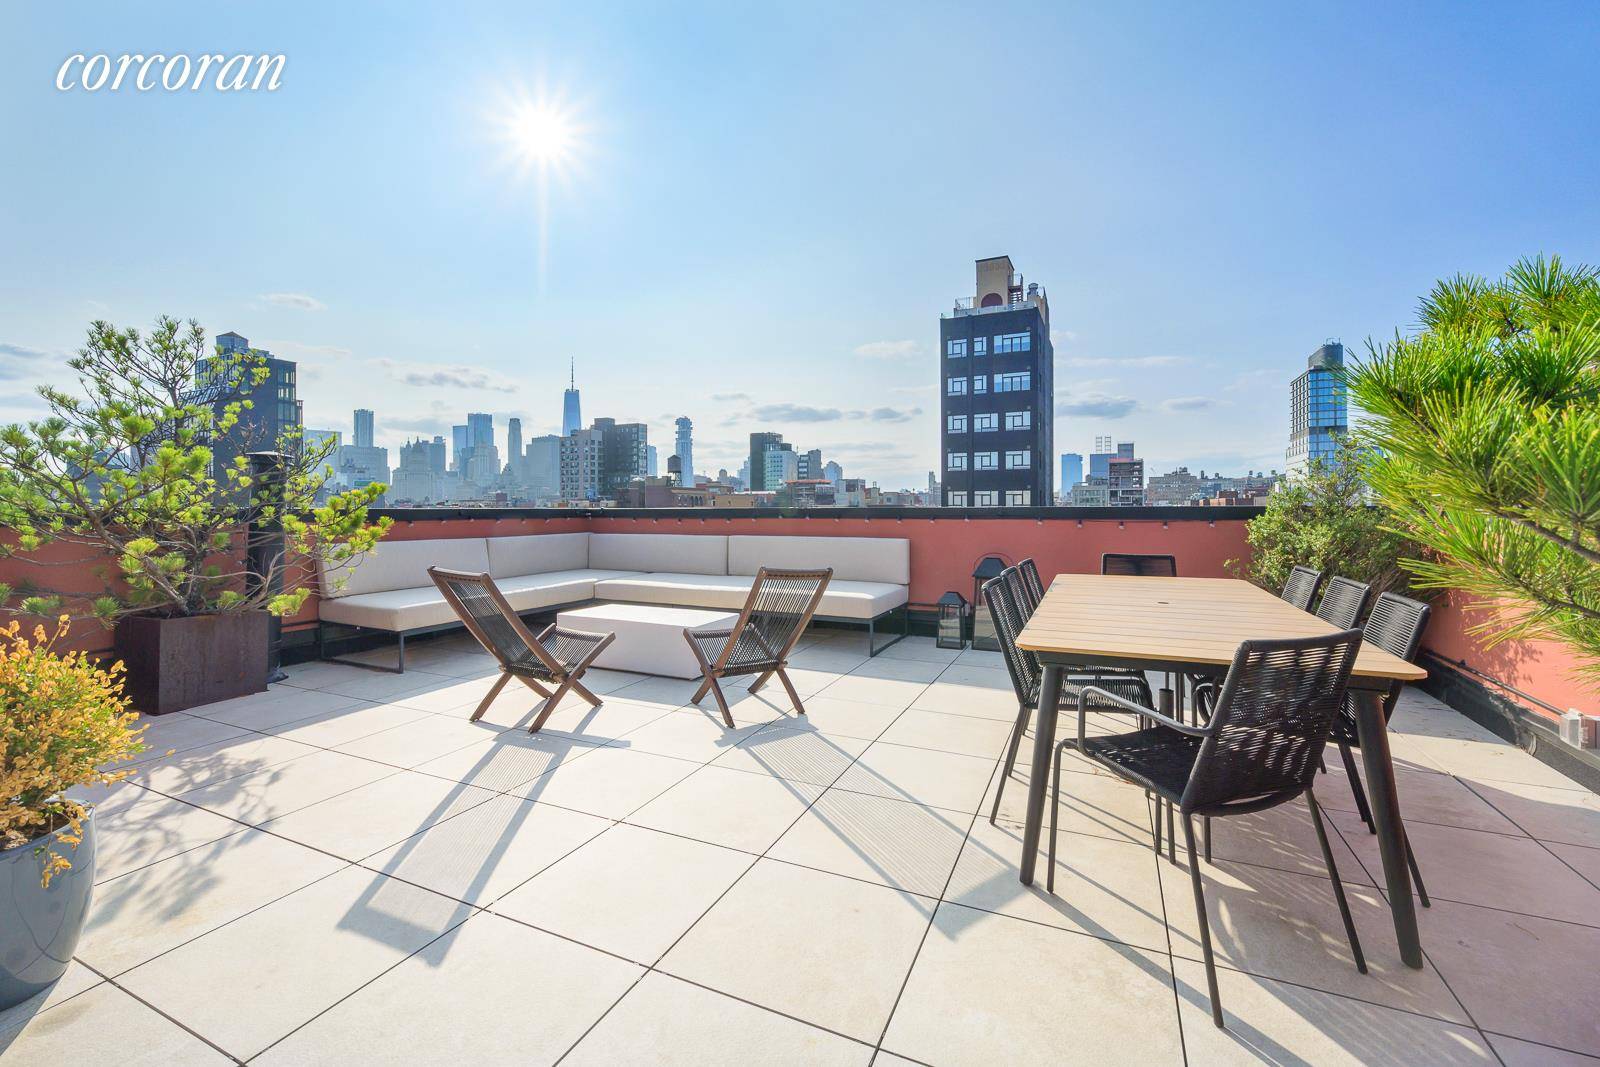 A rare 1667sqft trophy loft Penthouse with a spectacular roof terrace with sweeping bird's eye downtown views is available on the Lower East Side's liveliest block.